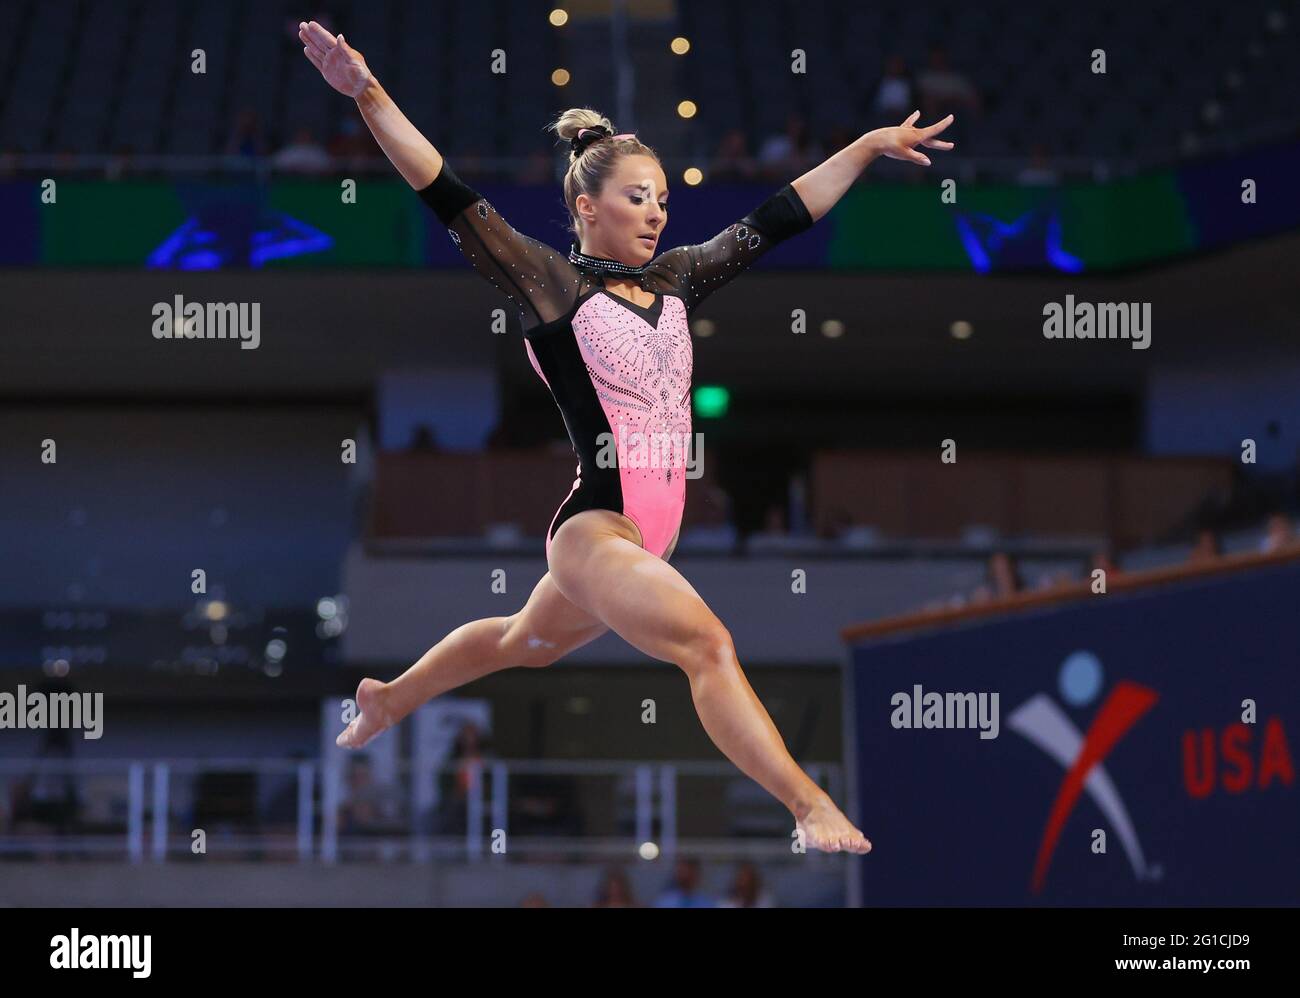 June 6, 2021: MyKayla Skinner performs on the balance beam during Day 2 of the Senior Women's 2021 U.S. Gymnastics Championships at Dickies Arena in Fort Worth, TX. Kyle Okita/CSM Stock Photo